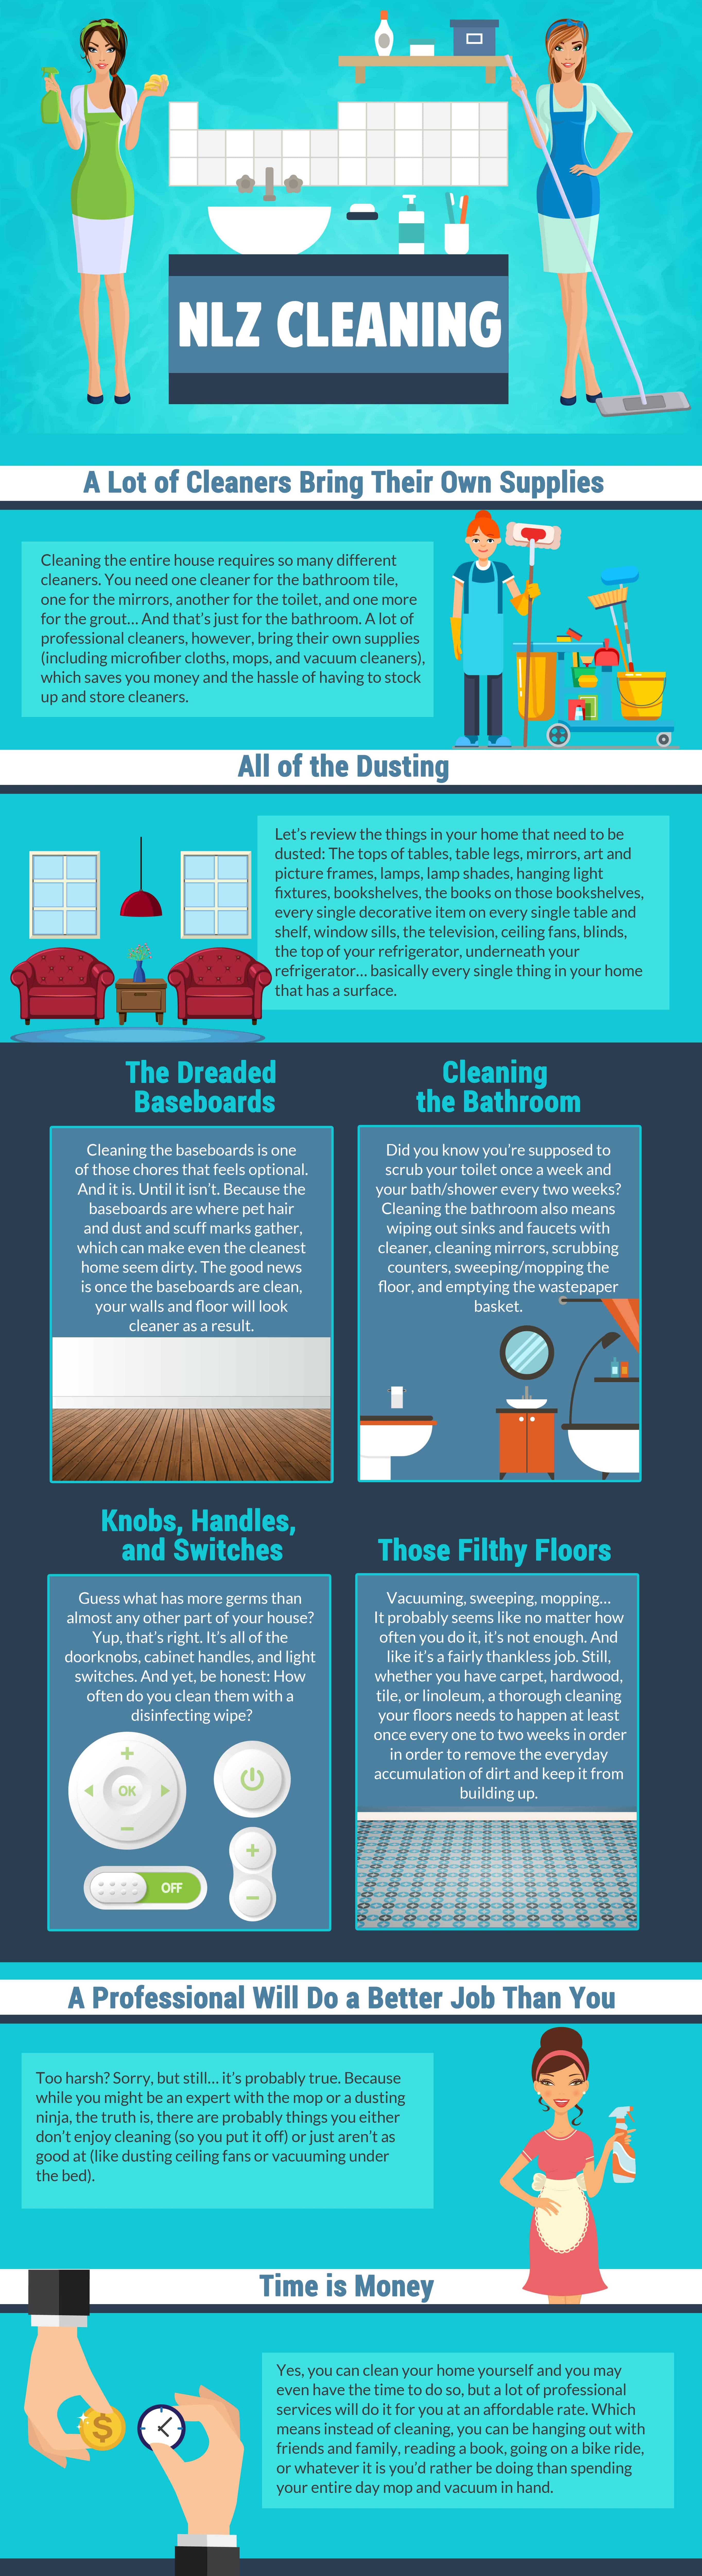 5 Important Things to Look for When Hiring a House Cleaning Service